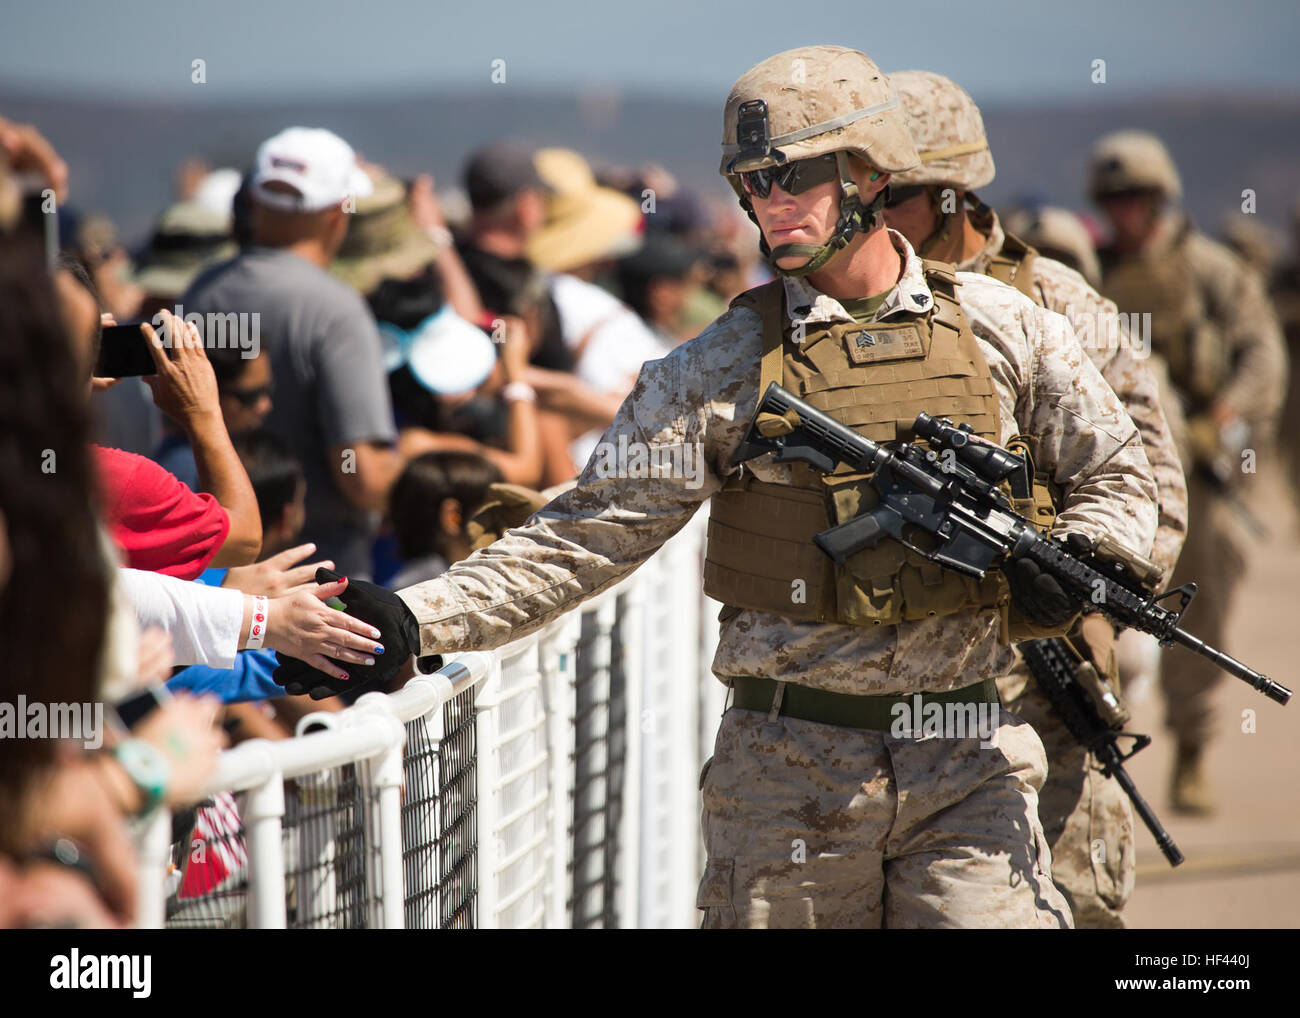 U.S. Marine Corps Sgt. Charles W. Duke from 3rd Battalion, 5th Marine Regiment, 1st Marine Division, interacts with the crowd while participating in the Marine Air Ground Task Force demonstration during the 2016 Marine Corps Air Station (MCAS) Miramar Air Show on MCAS Miramar, Calif., Sept. 23, 2016. The MCAS Miramar Air Show honors 100 years of the Marine Corps Reserves by showcasing aerial prowess of the Armed Forces and their appreciation of civilian community support to the troops. (U.S. Marine Corps photo by Sgt. Tia Dufour/Released) 160923-M-KS211-363 (29669966900) Stock Photo